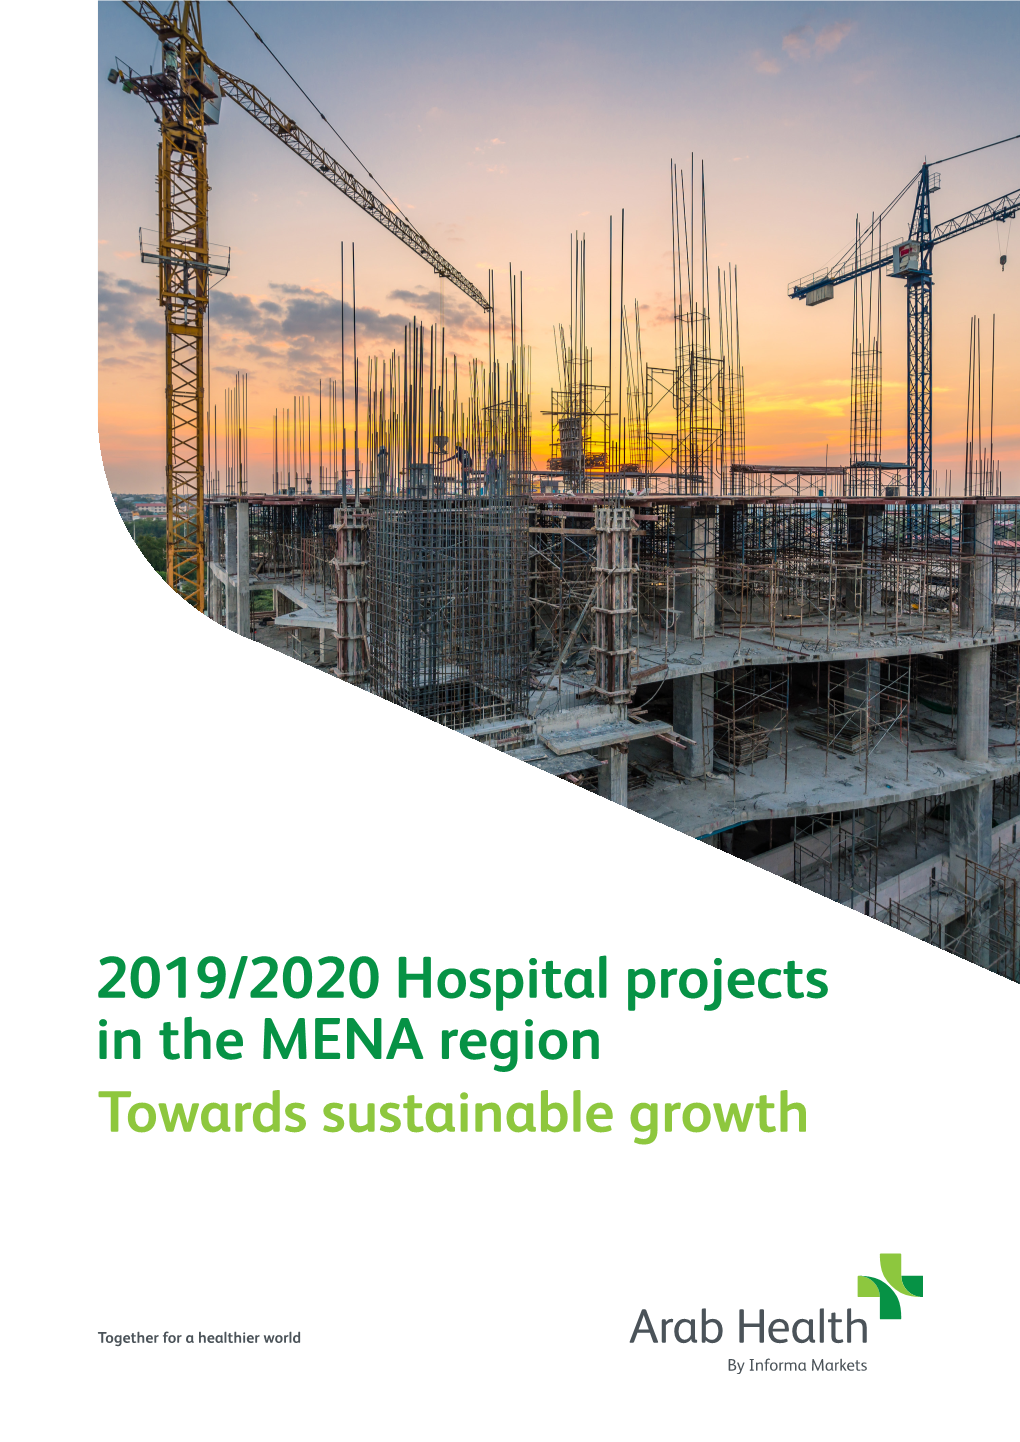 2019/2020 Hospital Projects in the MENA Region Towards Sustainable Growth